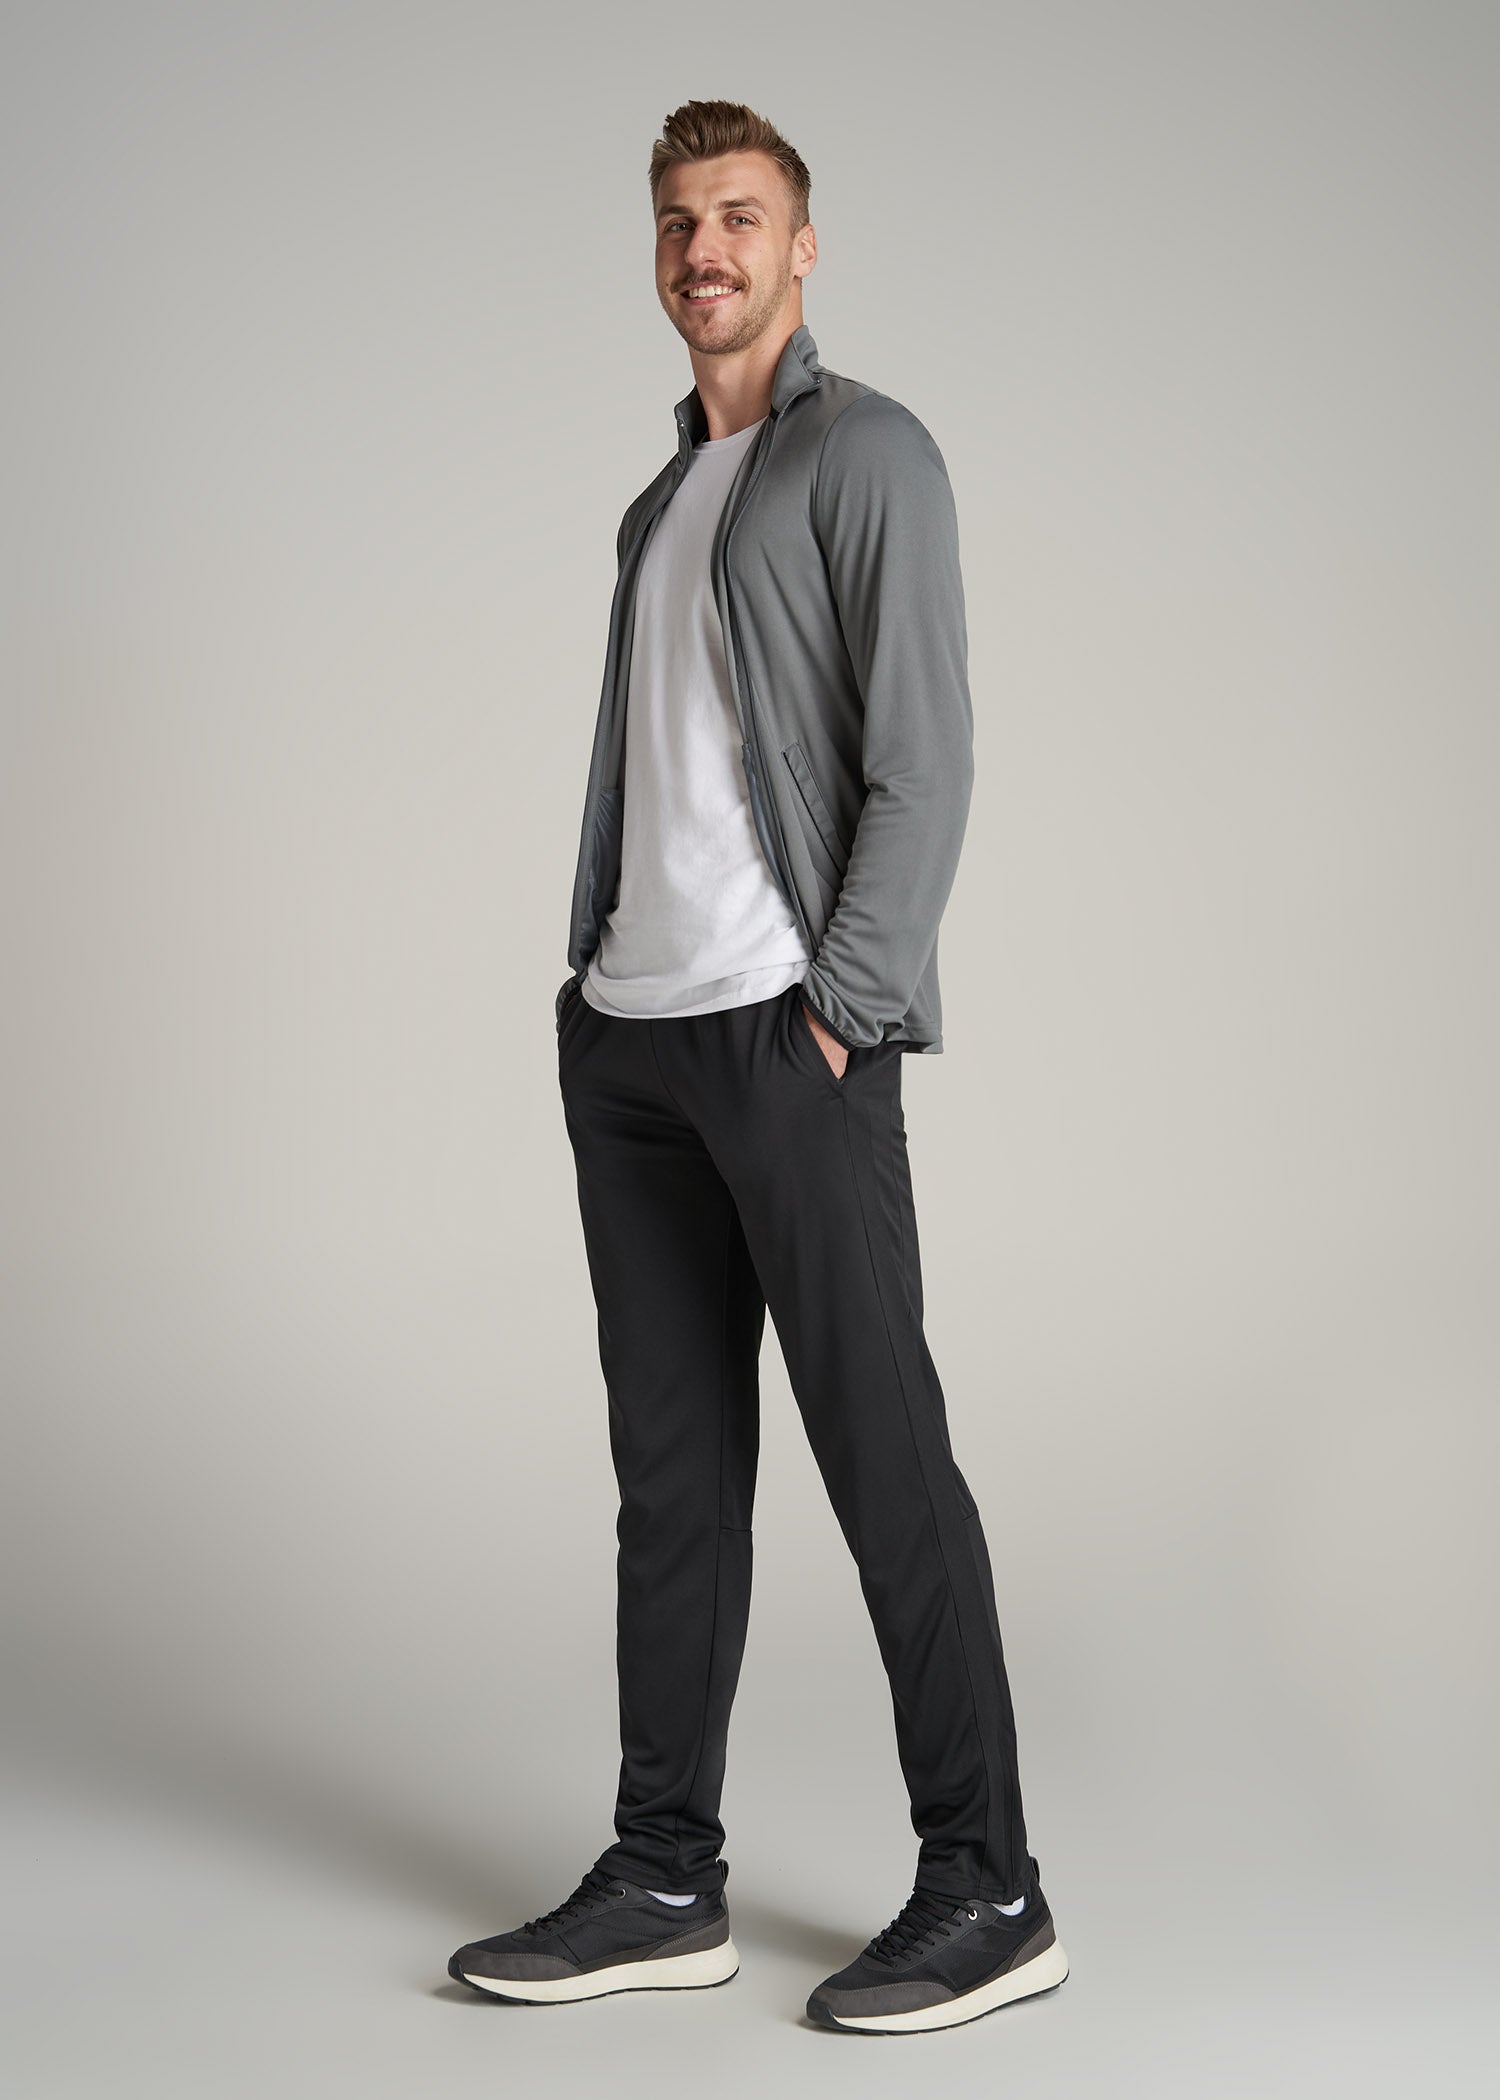 Tall Men's Athletic Wear from American Tall